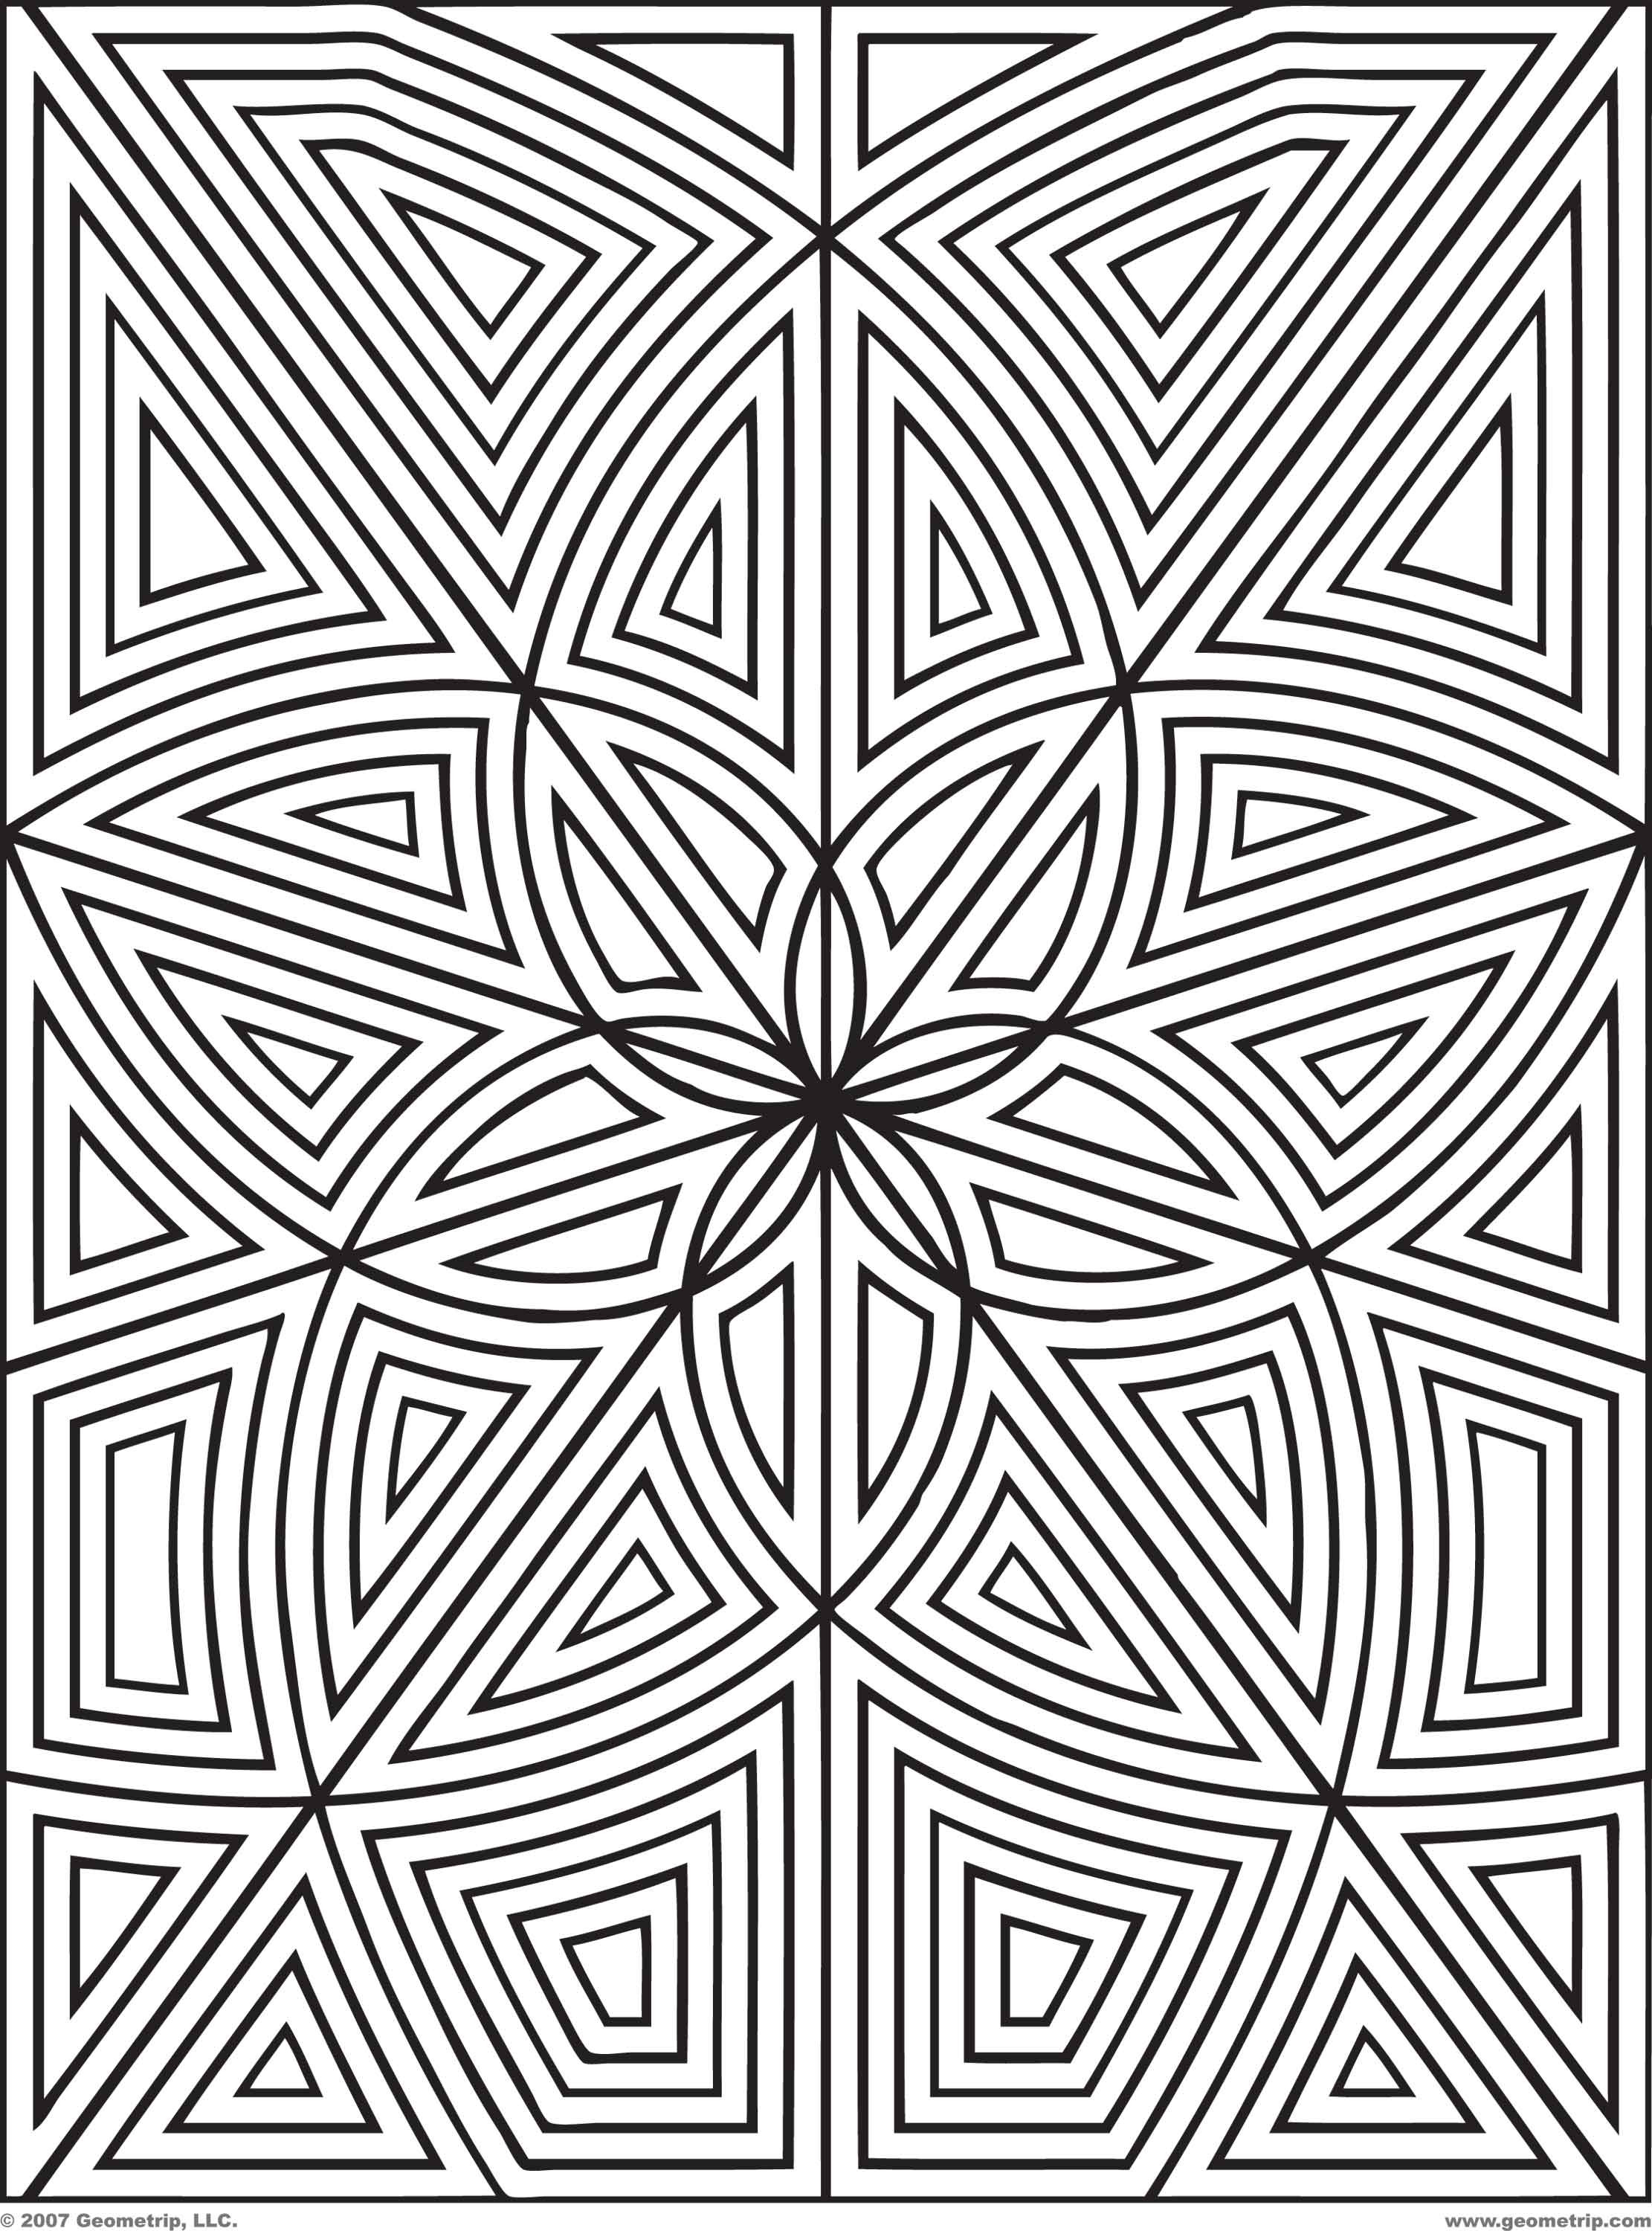 Design Coloring Pages
 GEOMETRIC COLORING PAGES Coloring Pages